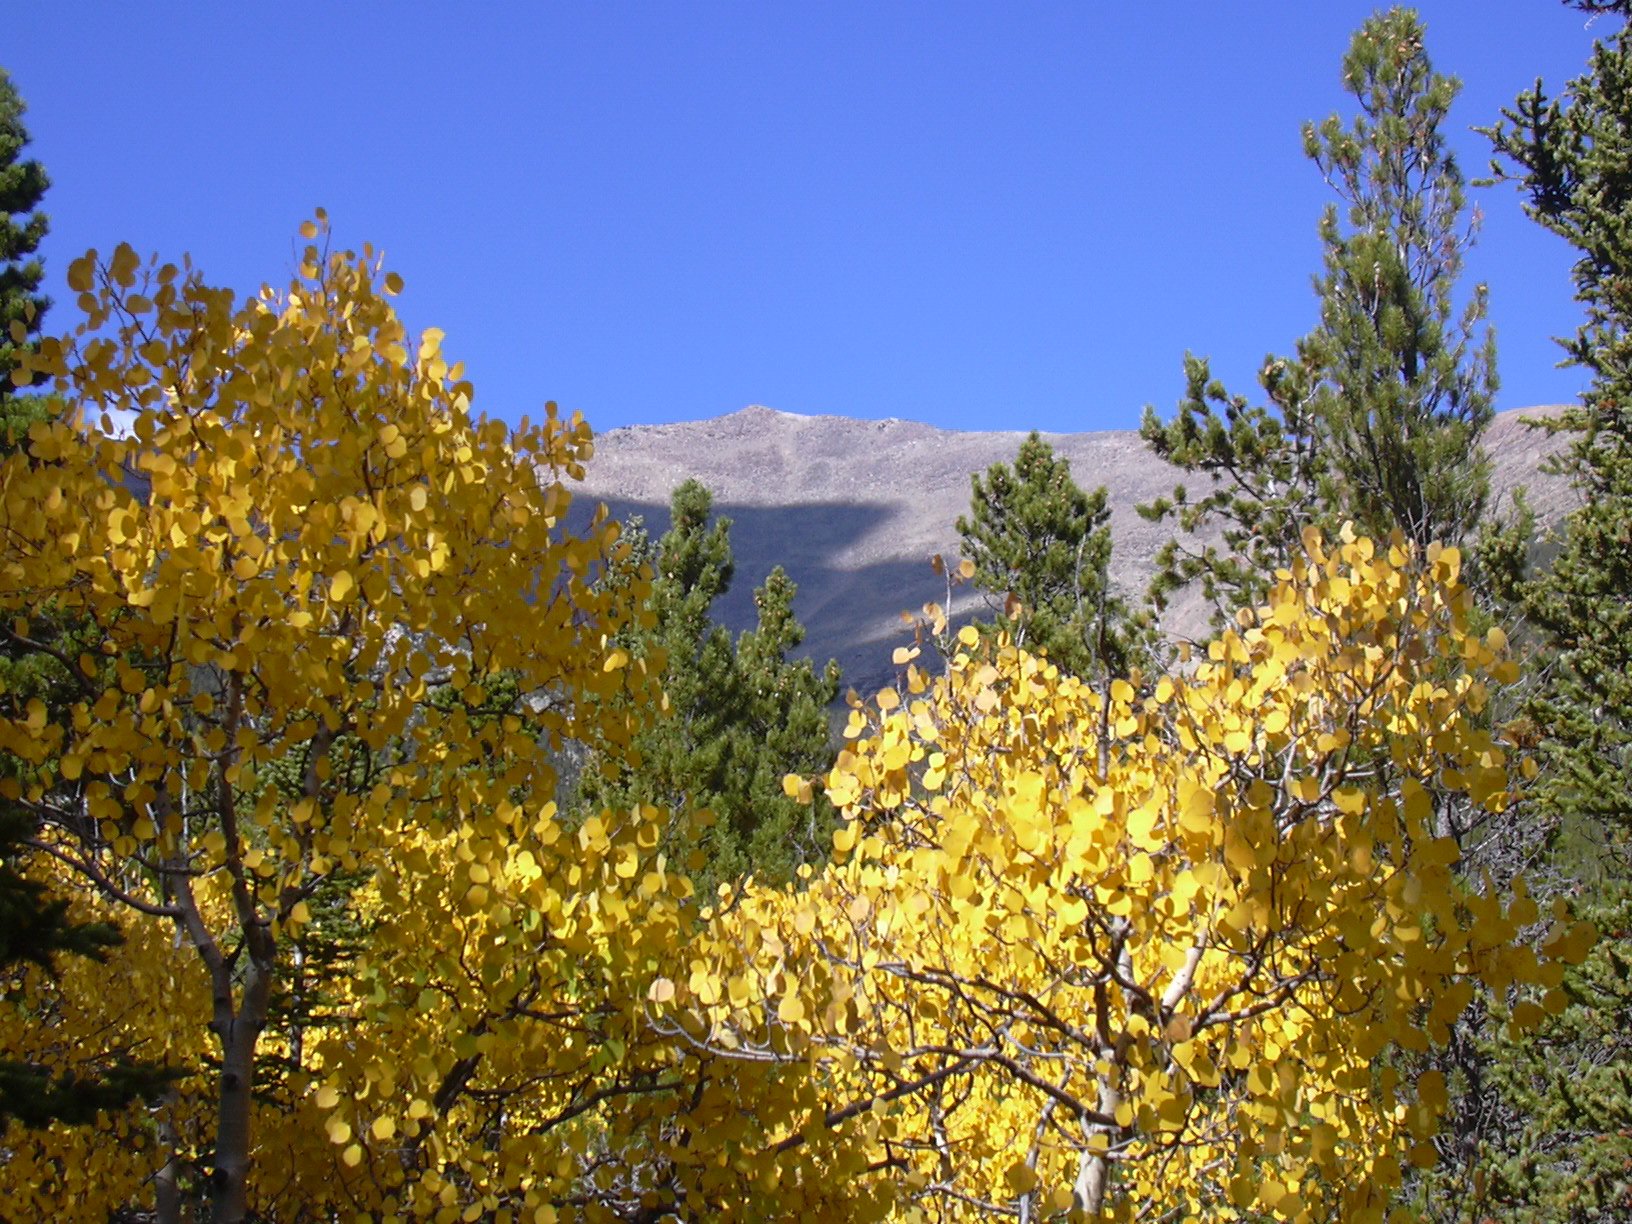 Mt Meeker with aspens, 09/27/08